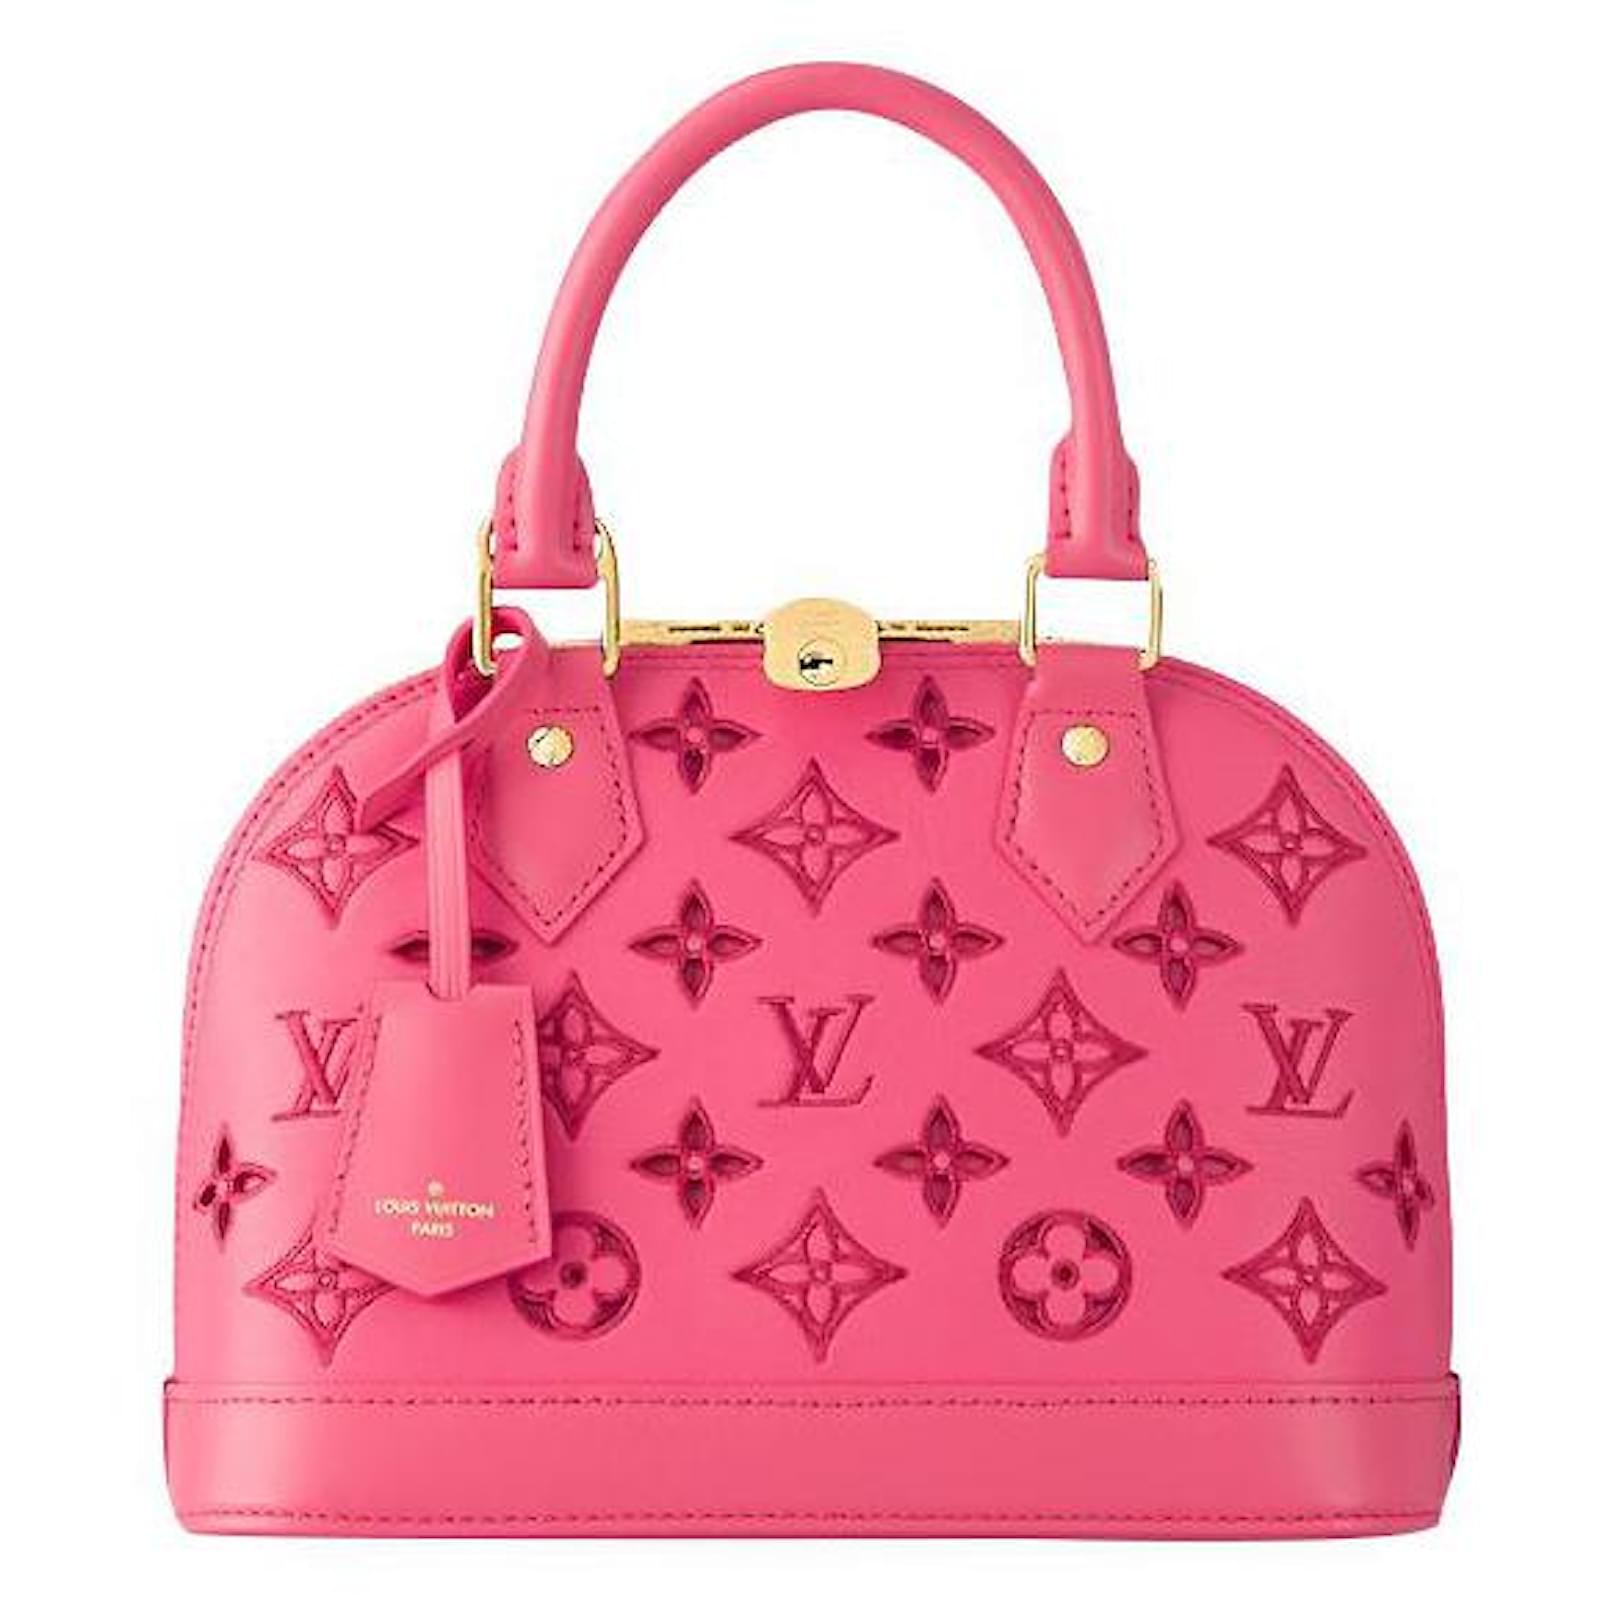 Handbags Louis Vuitton LV Alma Pink Leather Broderie Anglaise Animation